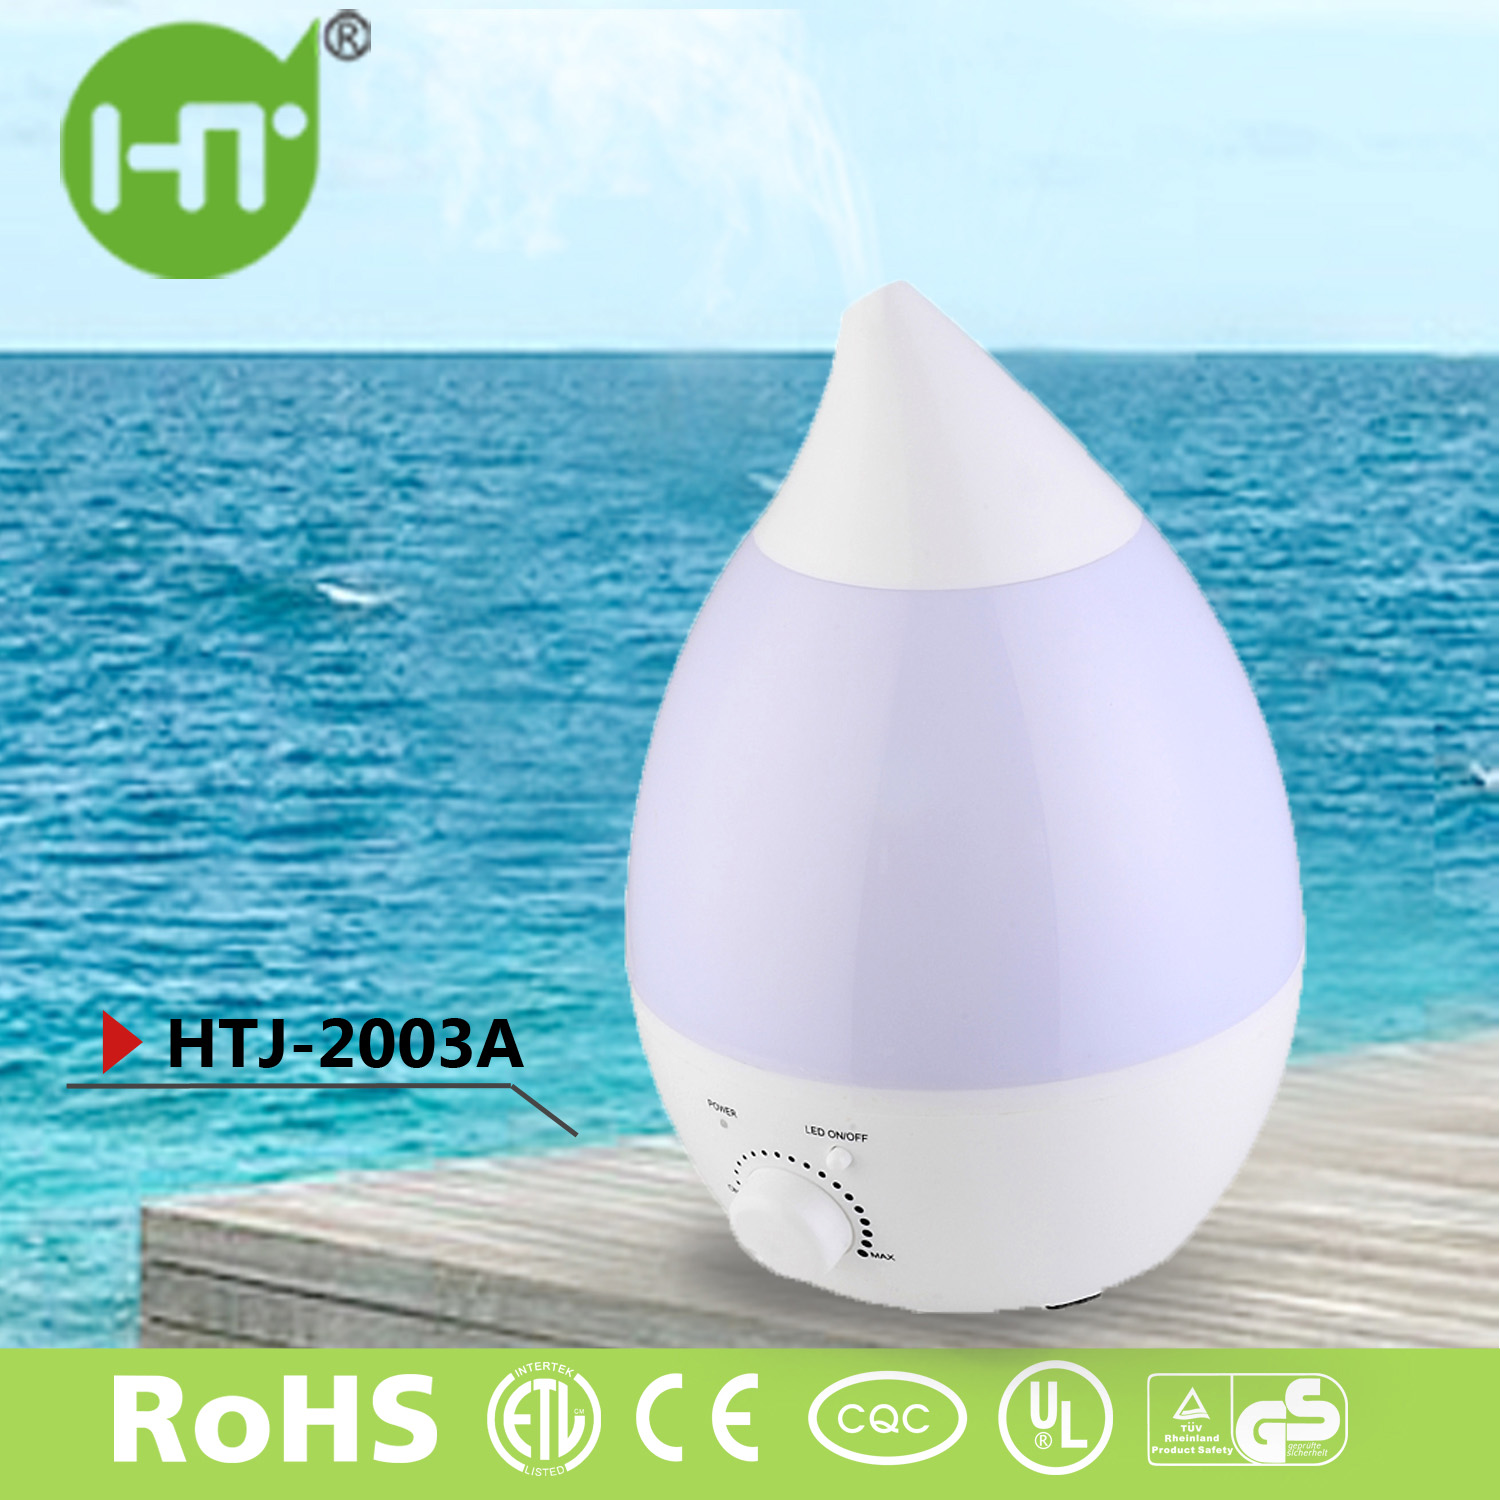 HTJ-2003A 2.8L LED Cool Mist Spray Essential Oil Available Humidifier